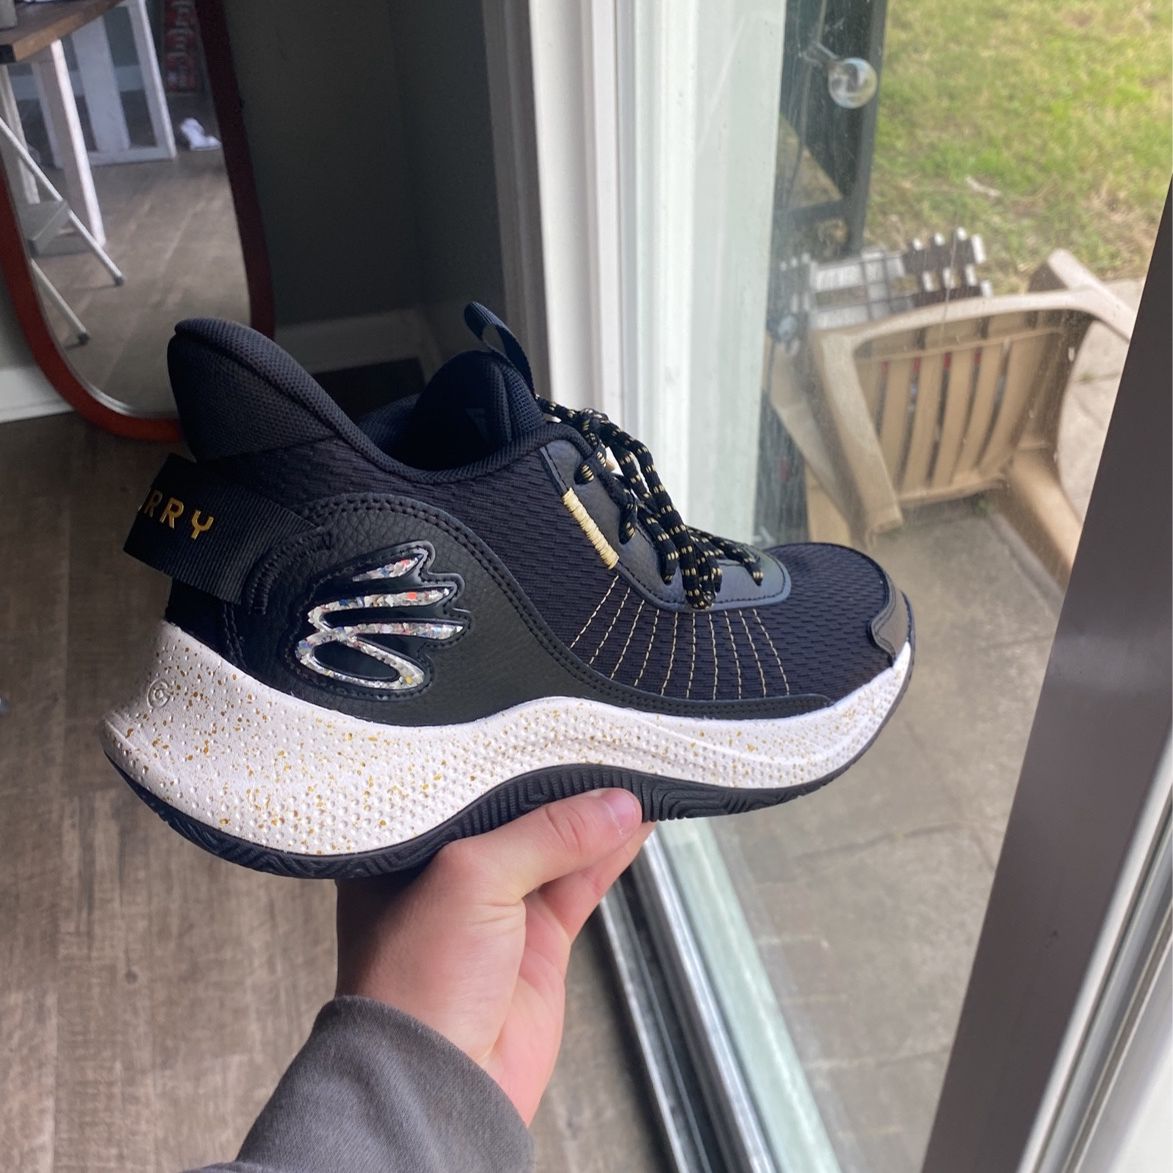 Curry Basketball Shoes